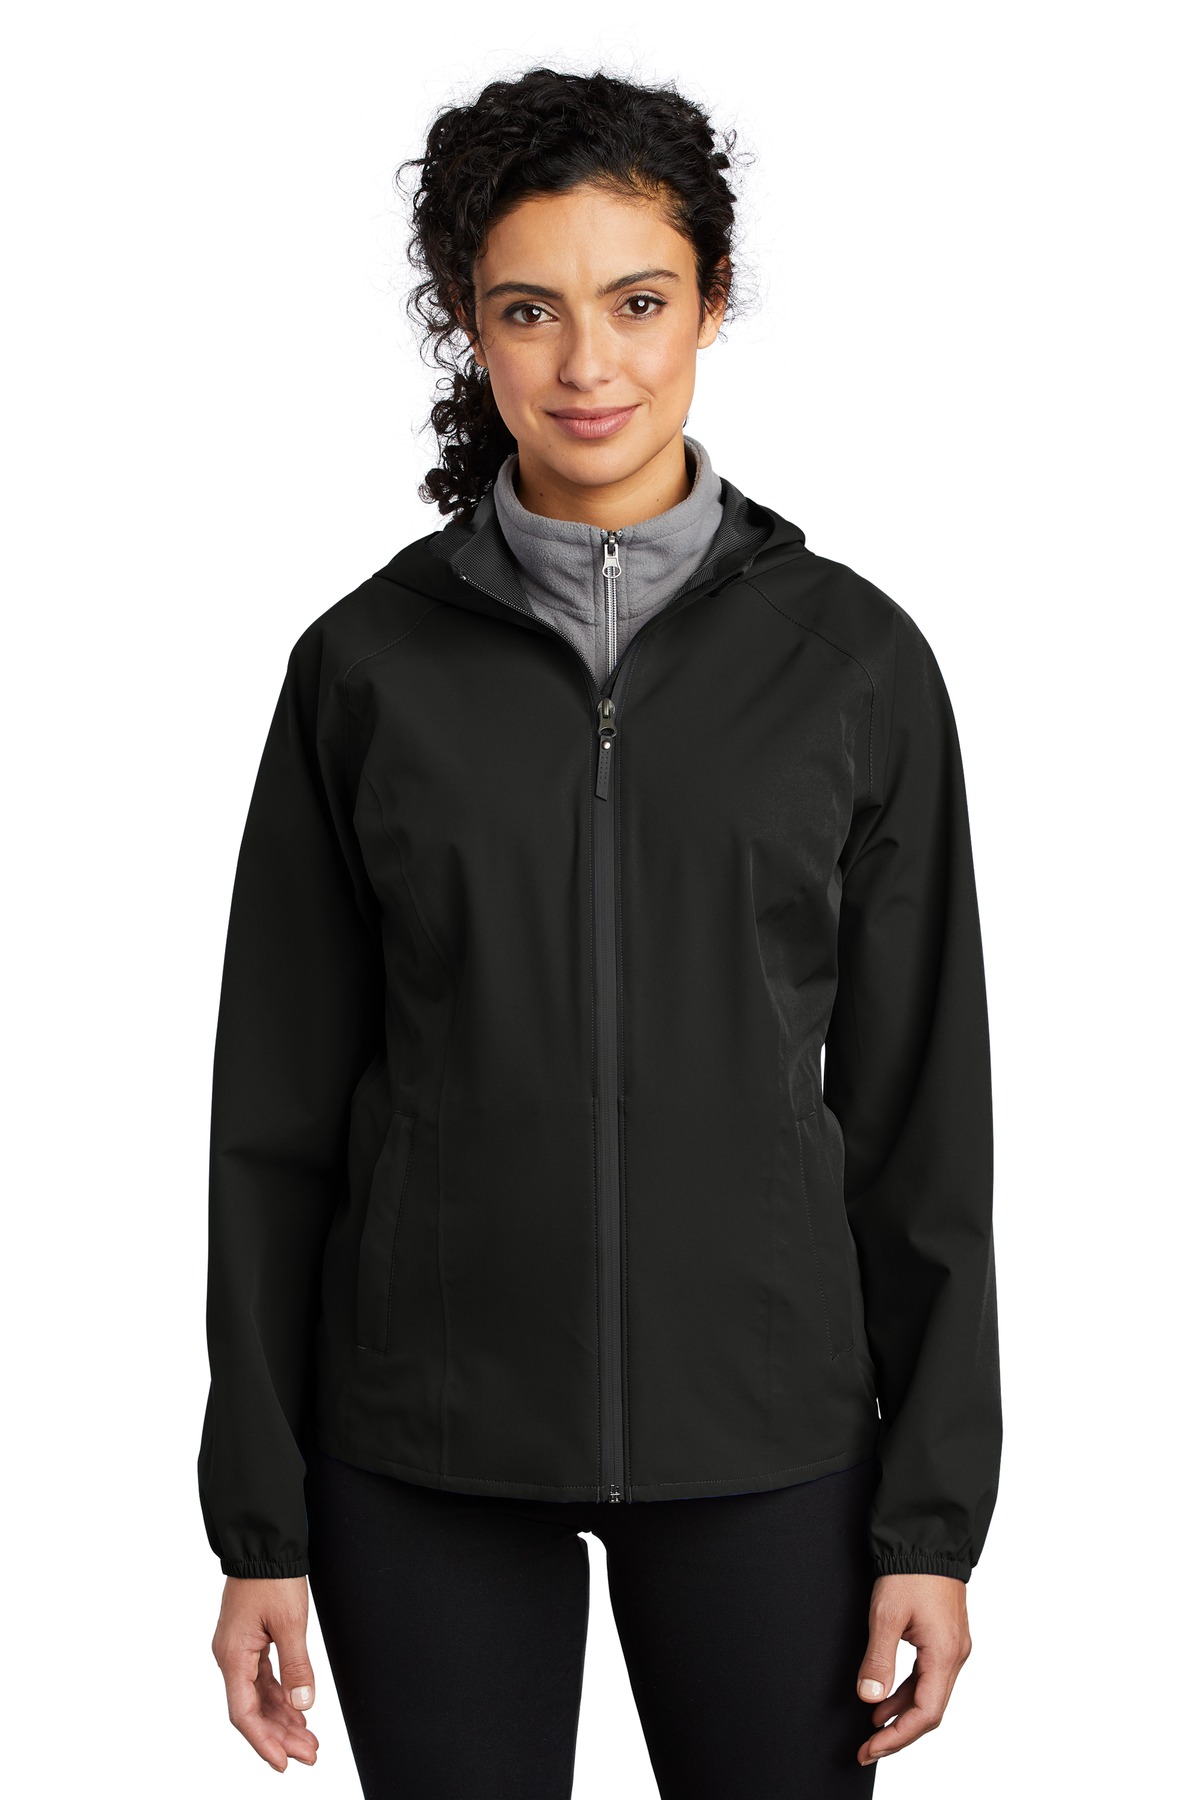 Port Authority Ladies Outerwear for Corporate & Hospitality ® Ladies Essential Rain Jacket-Port Authority